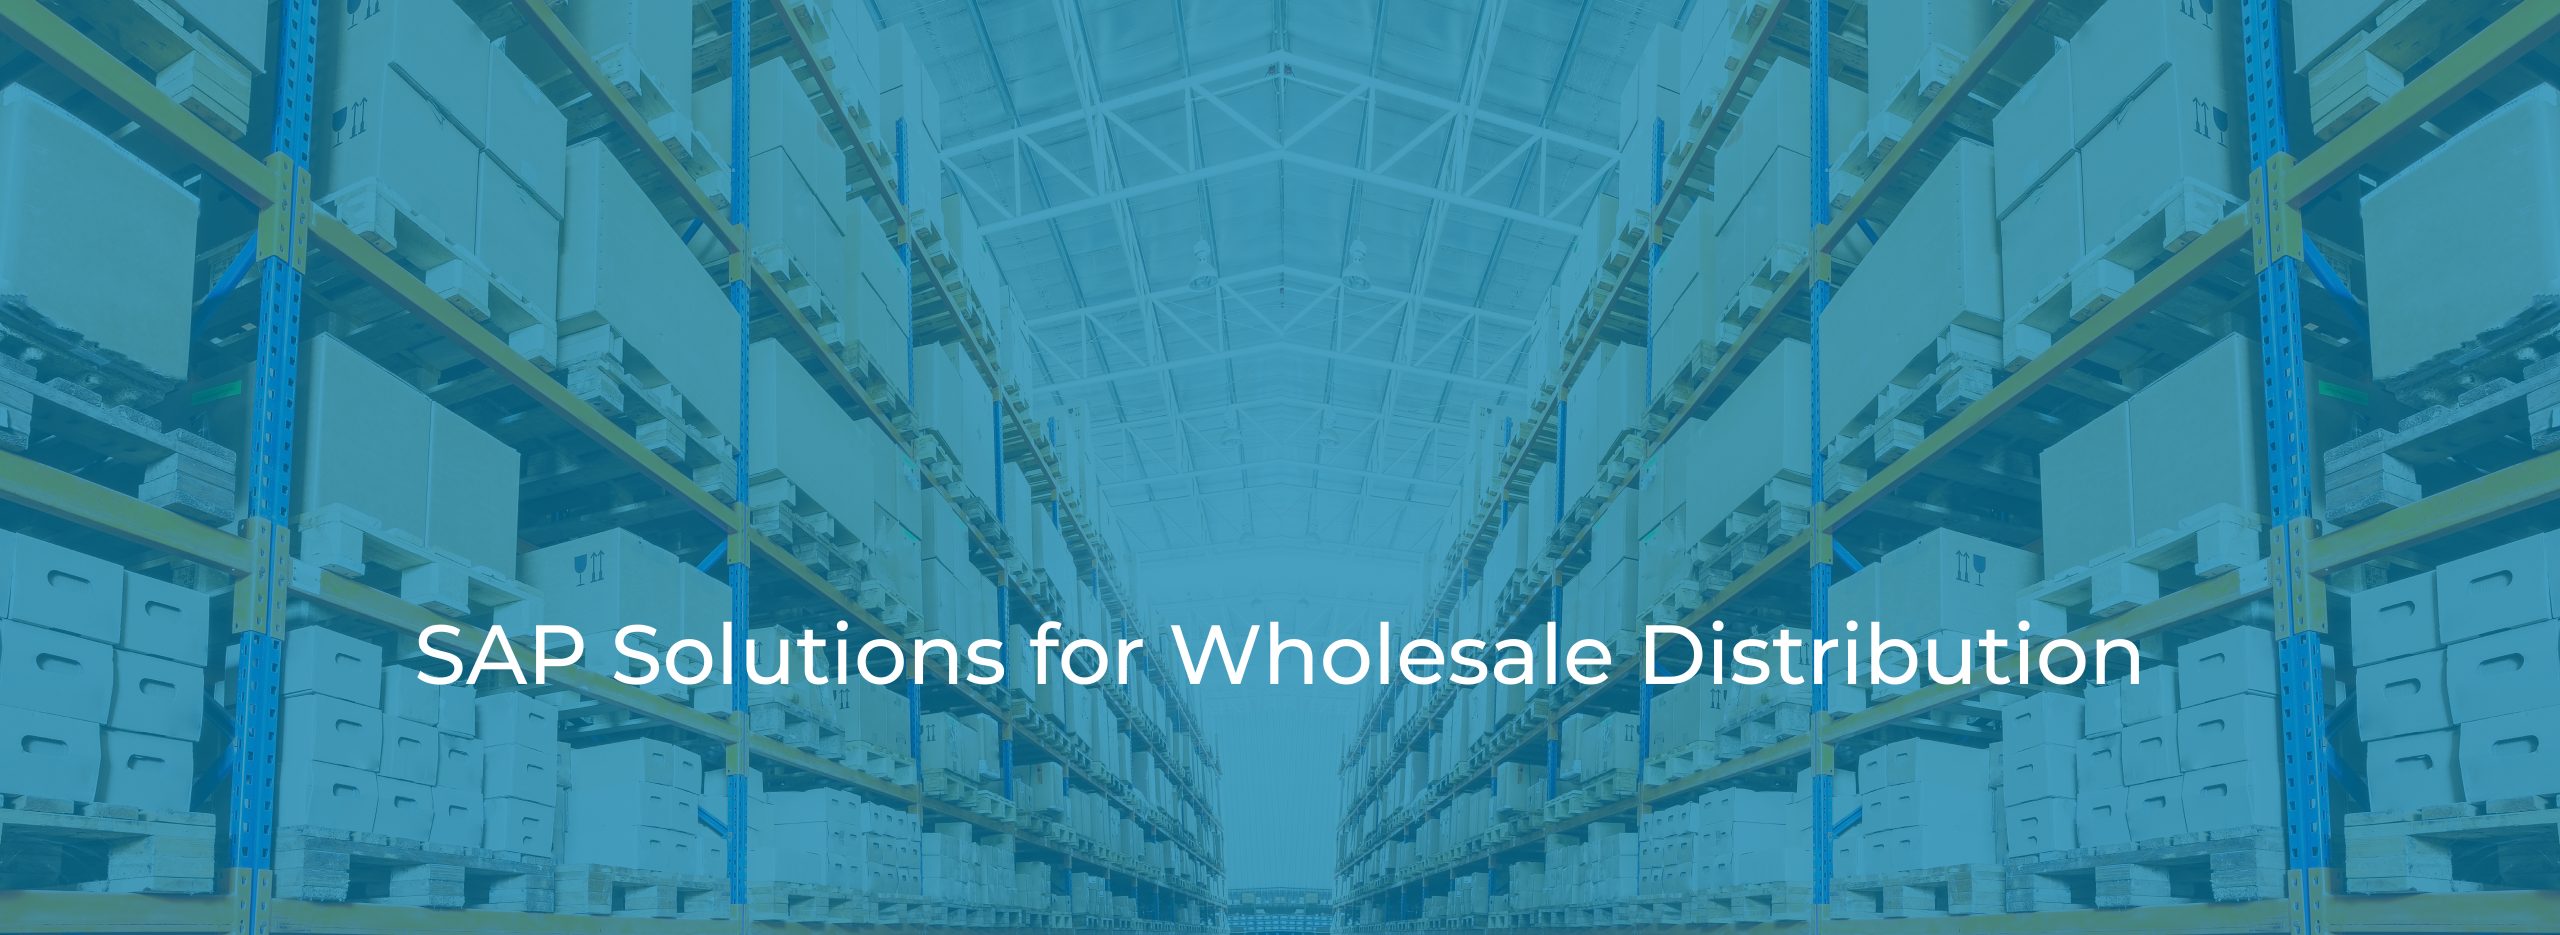 SAP Solutions for Wholesale Distribution Industry banner